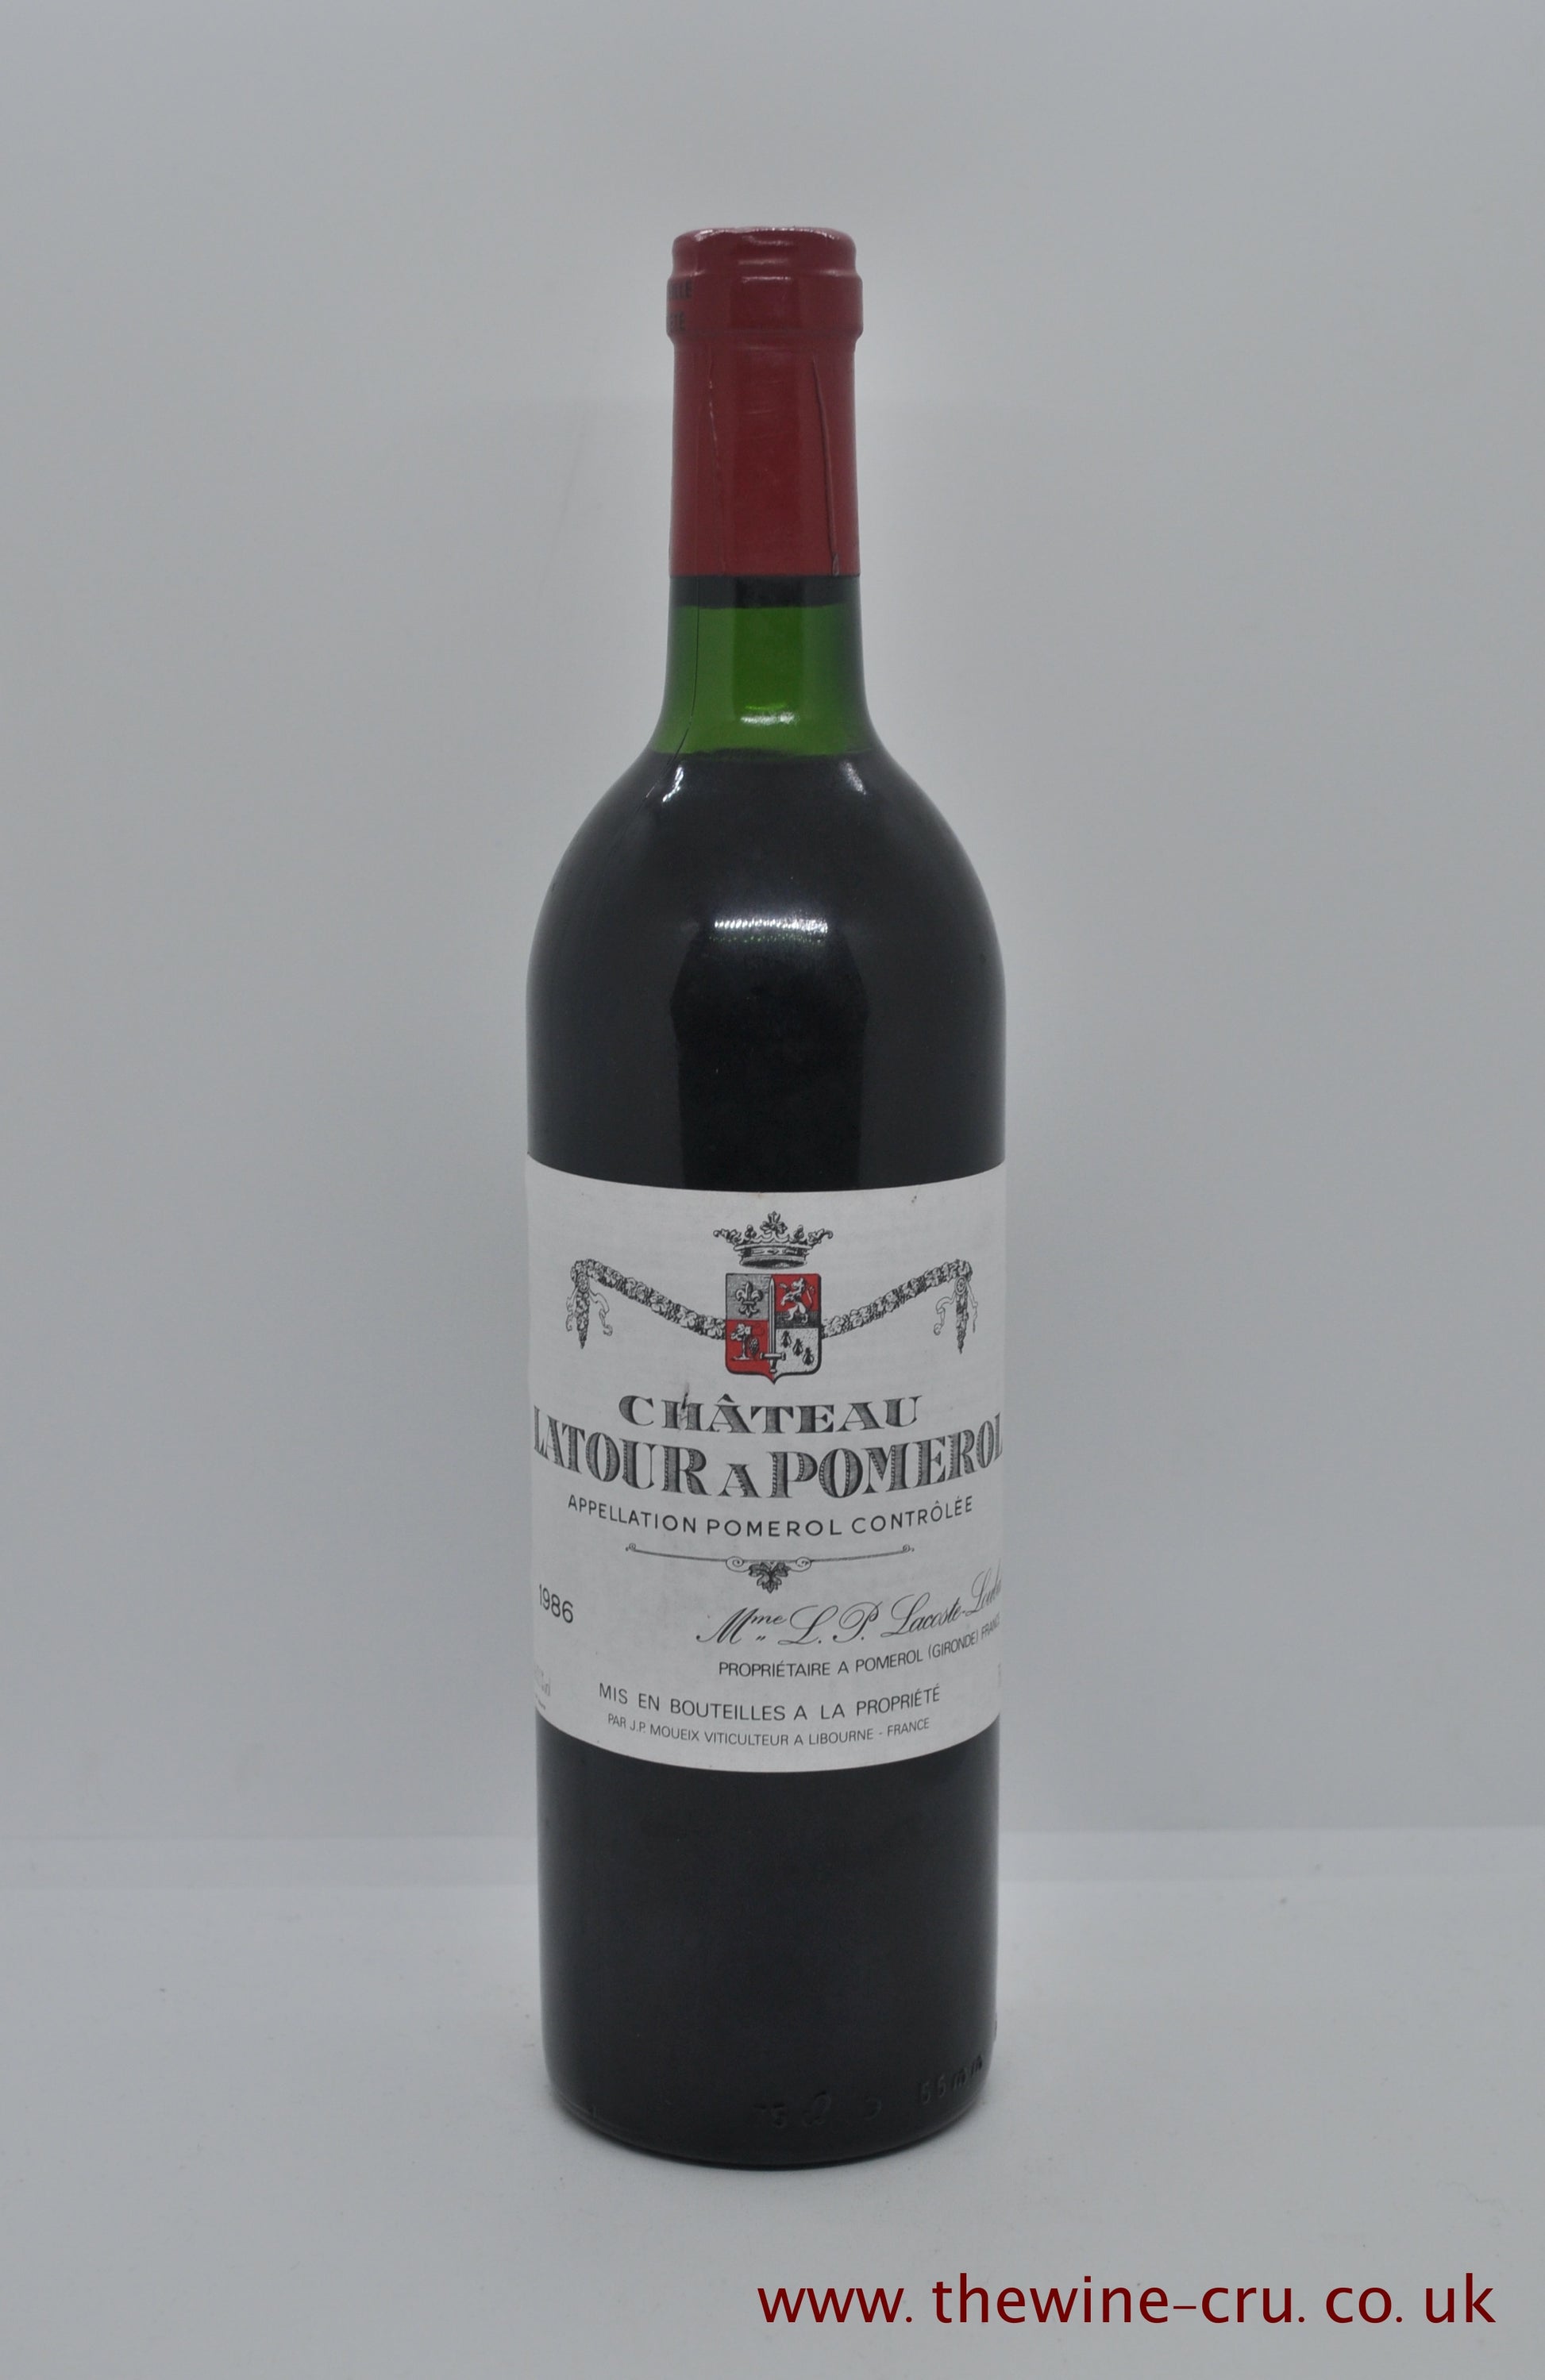 1986 vintage red wine. Chateau Latour A Pomerol. france. Bordeaux. Immediate delivery UK. Free local delivery.